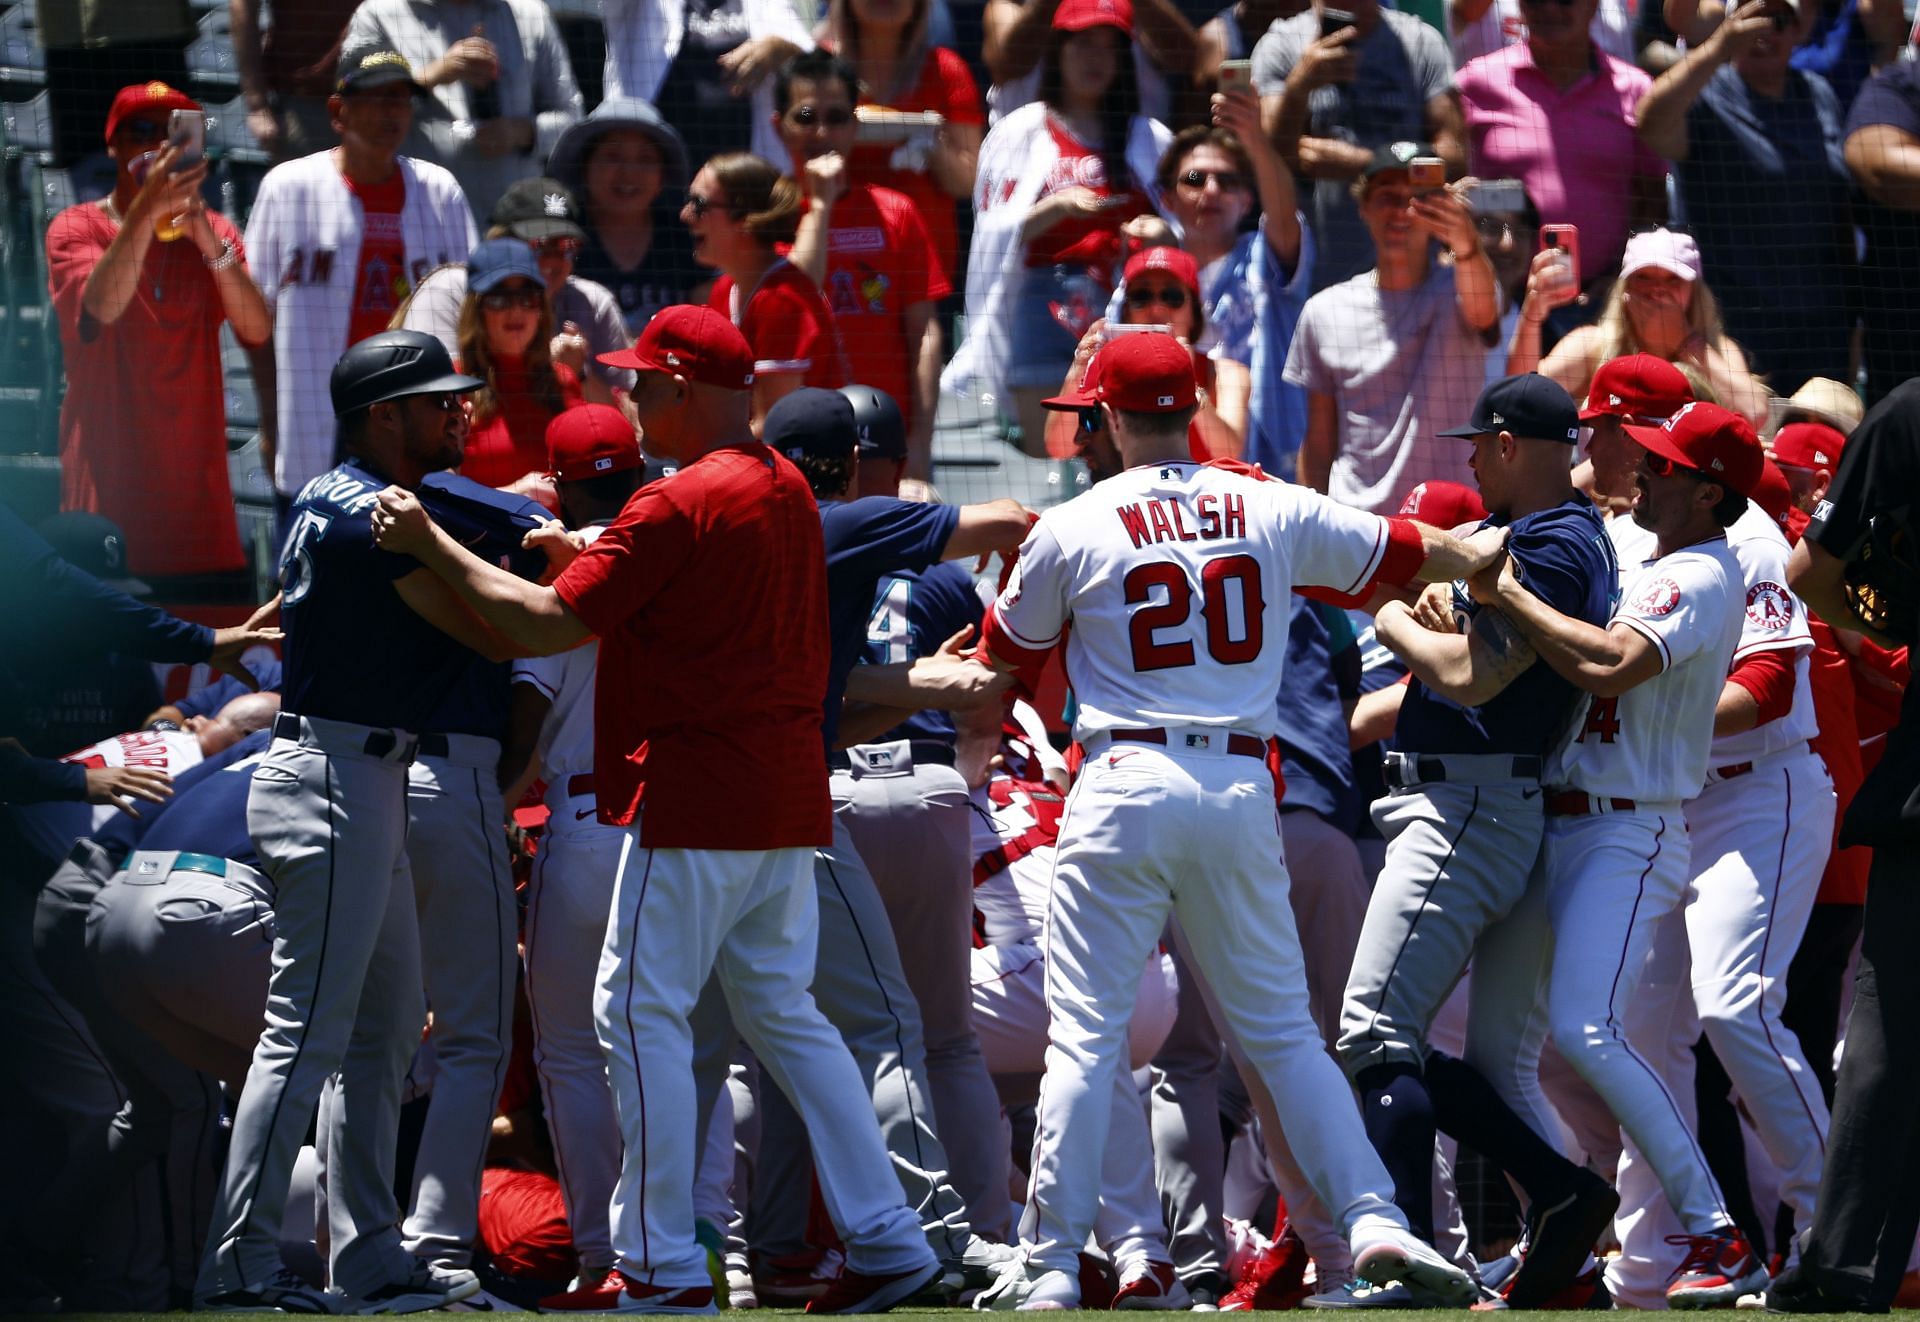 Angels' Anthony Rendon avoids charges from altercation with fan